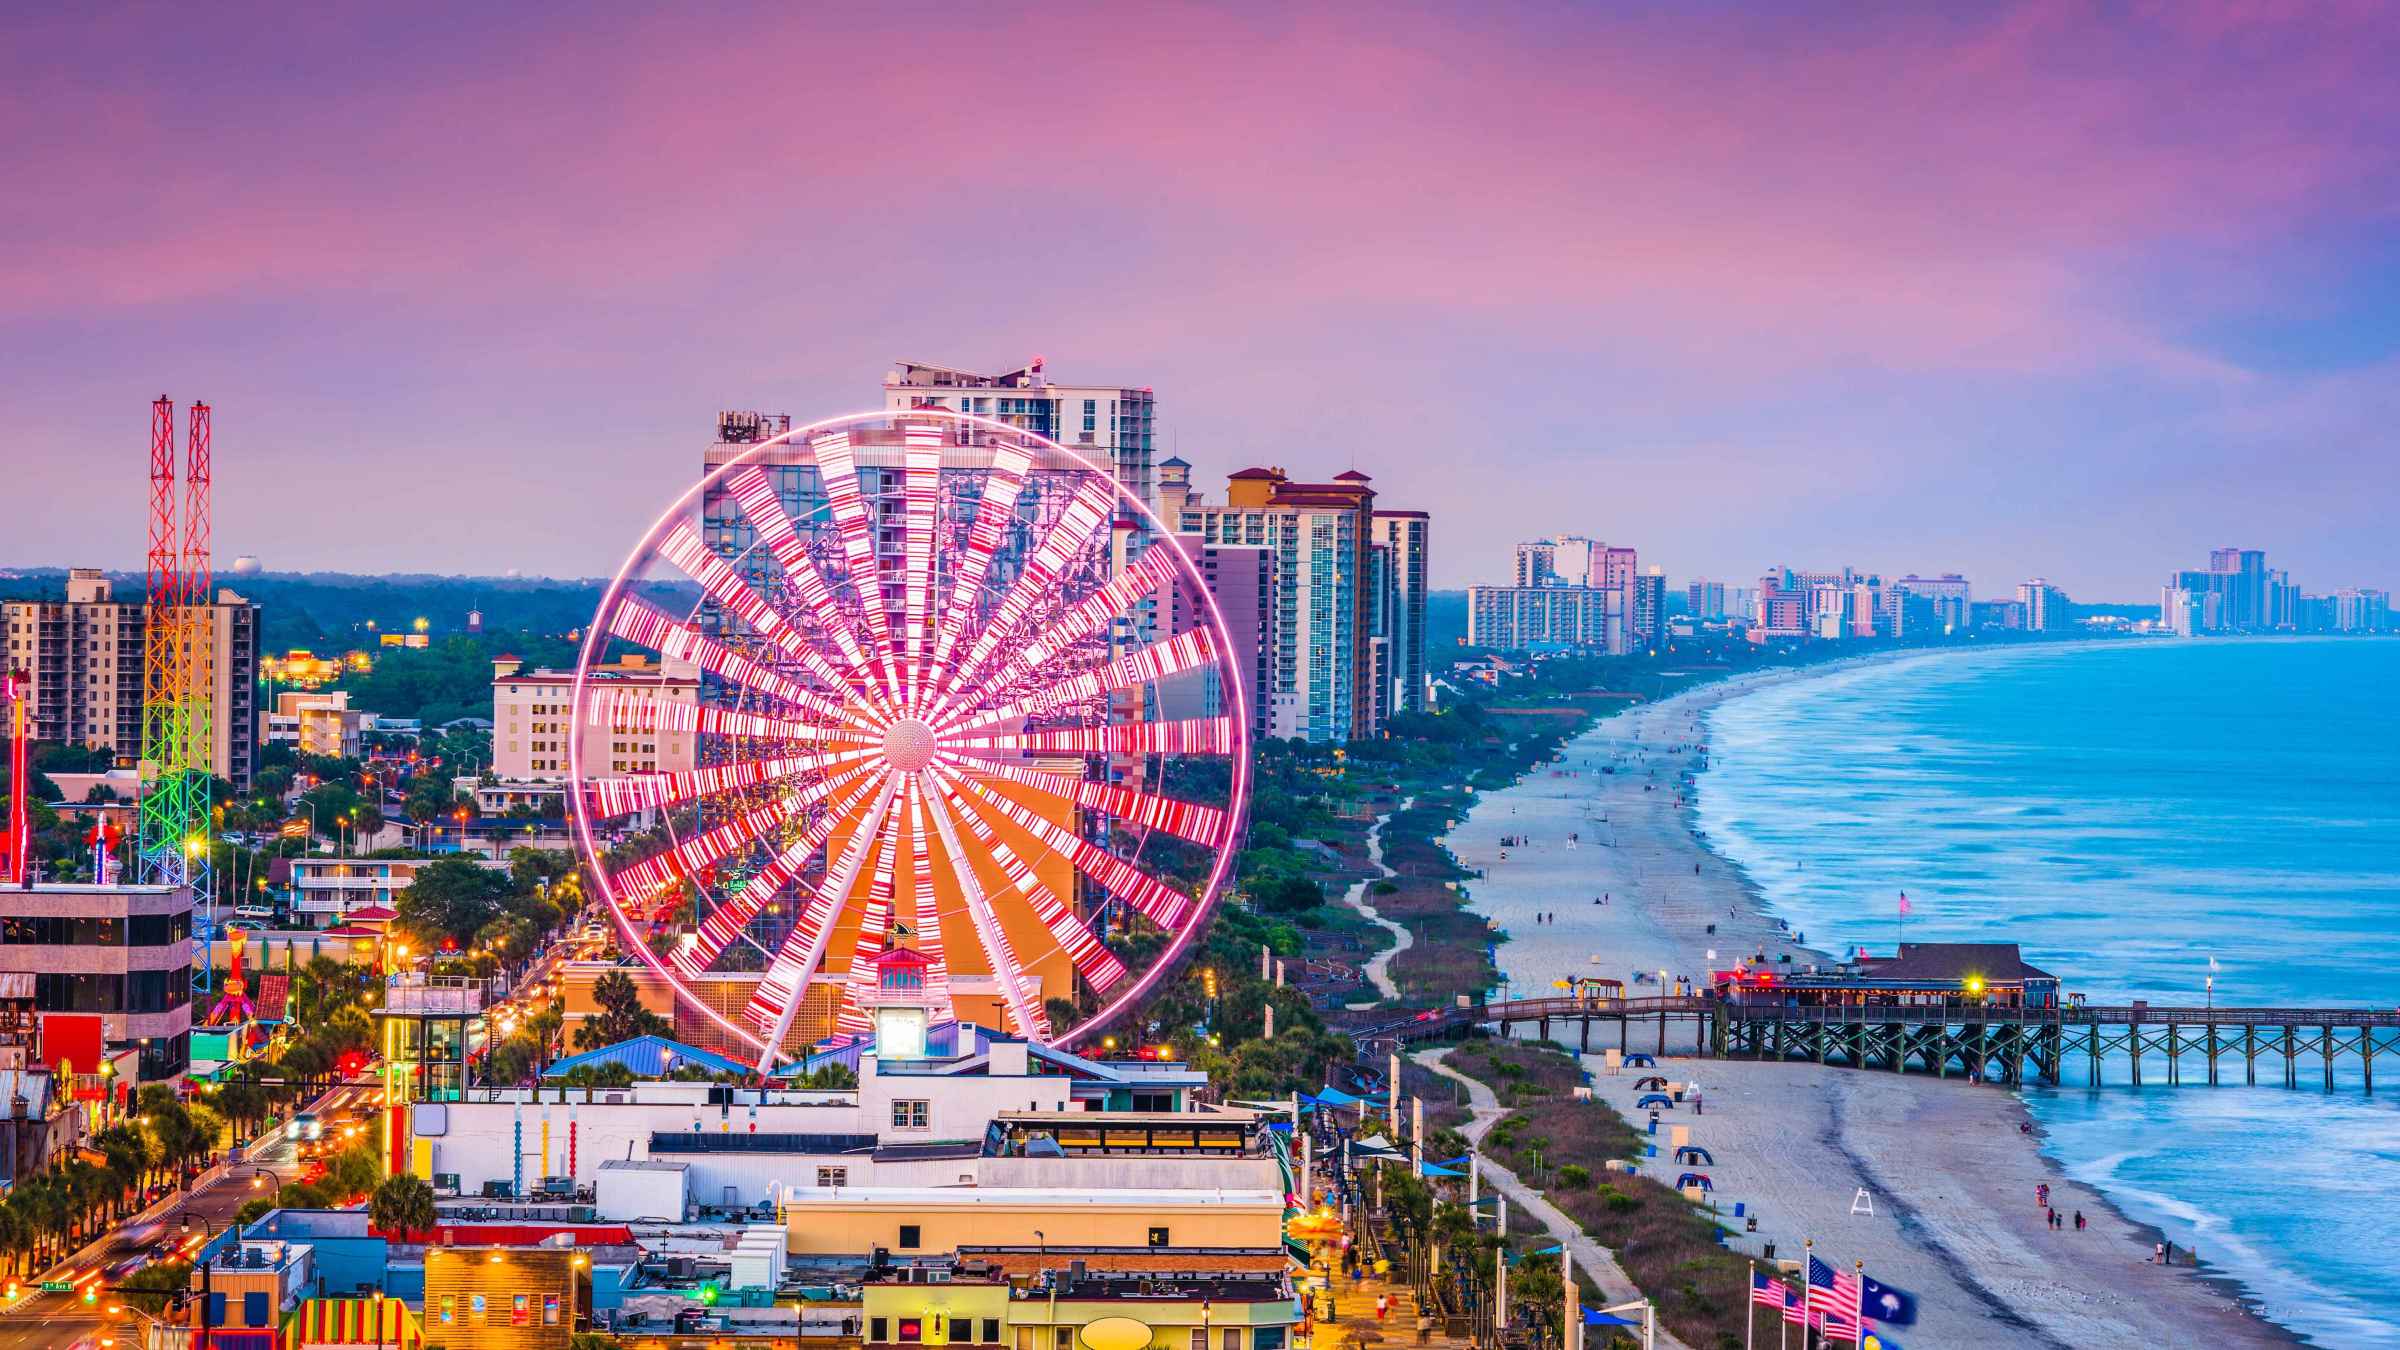 Myrtle Beach 2021 Top 10 Tours & Activities (with Photos) Things to Do in Myrtle Beach